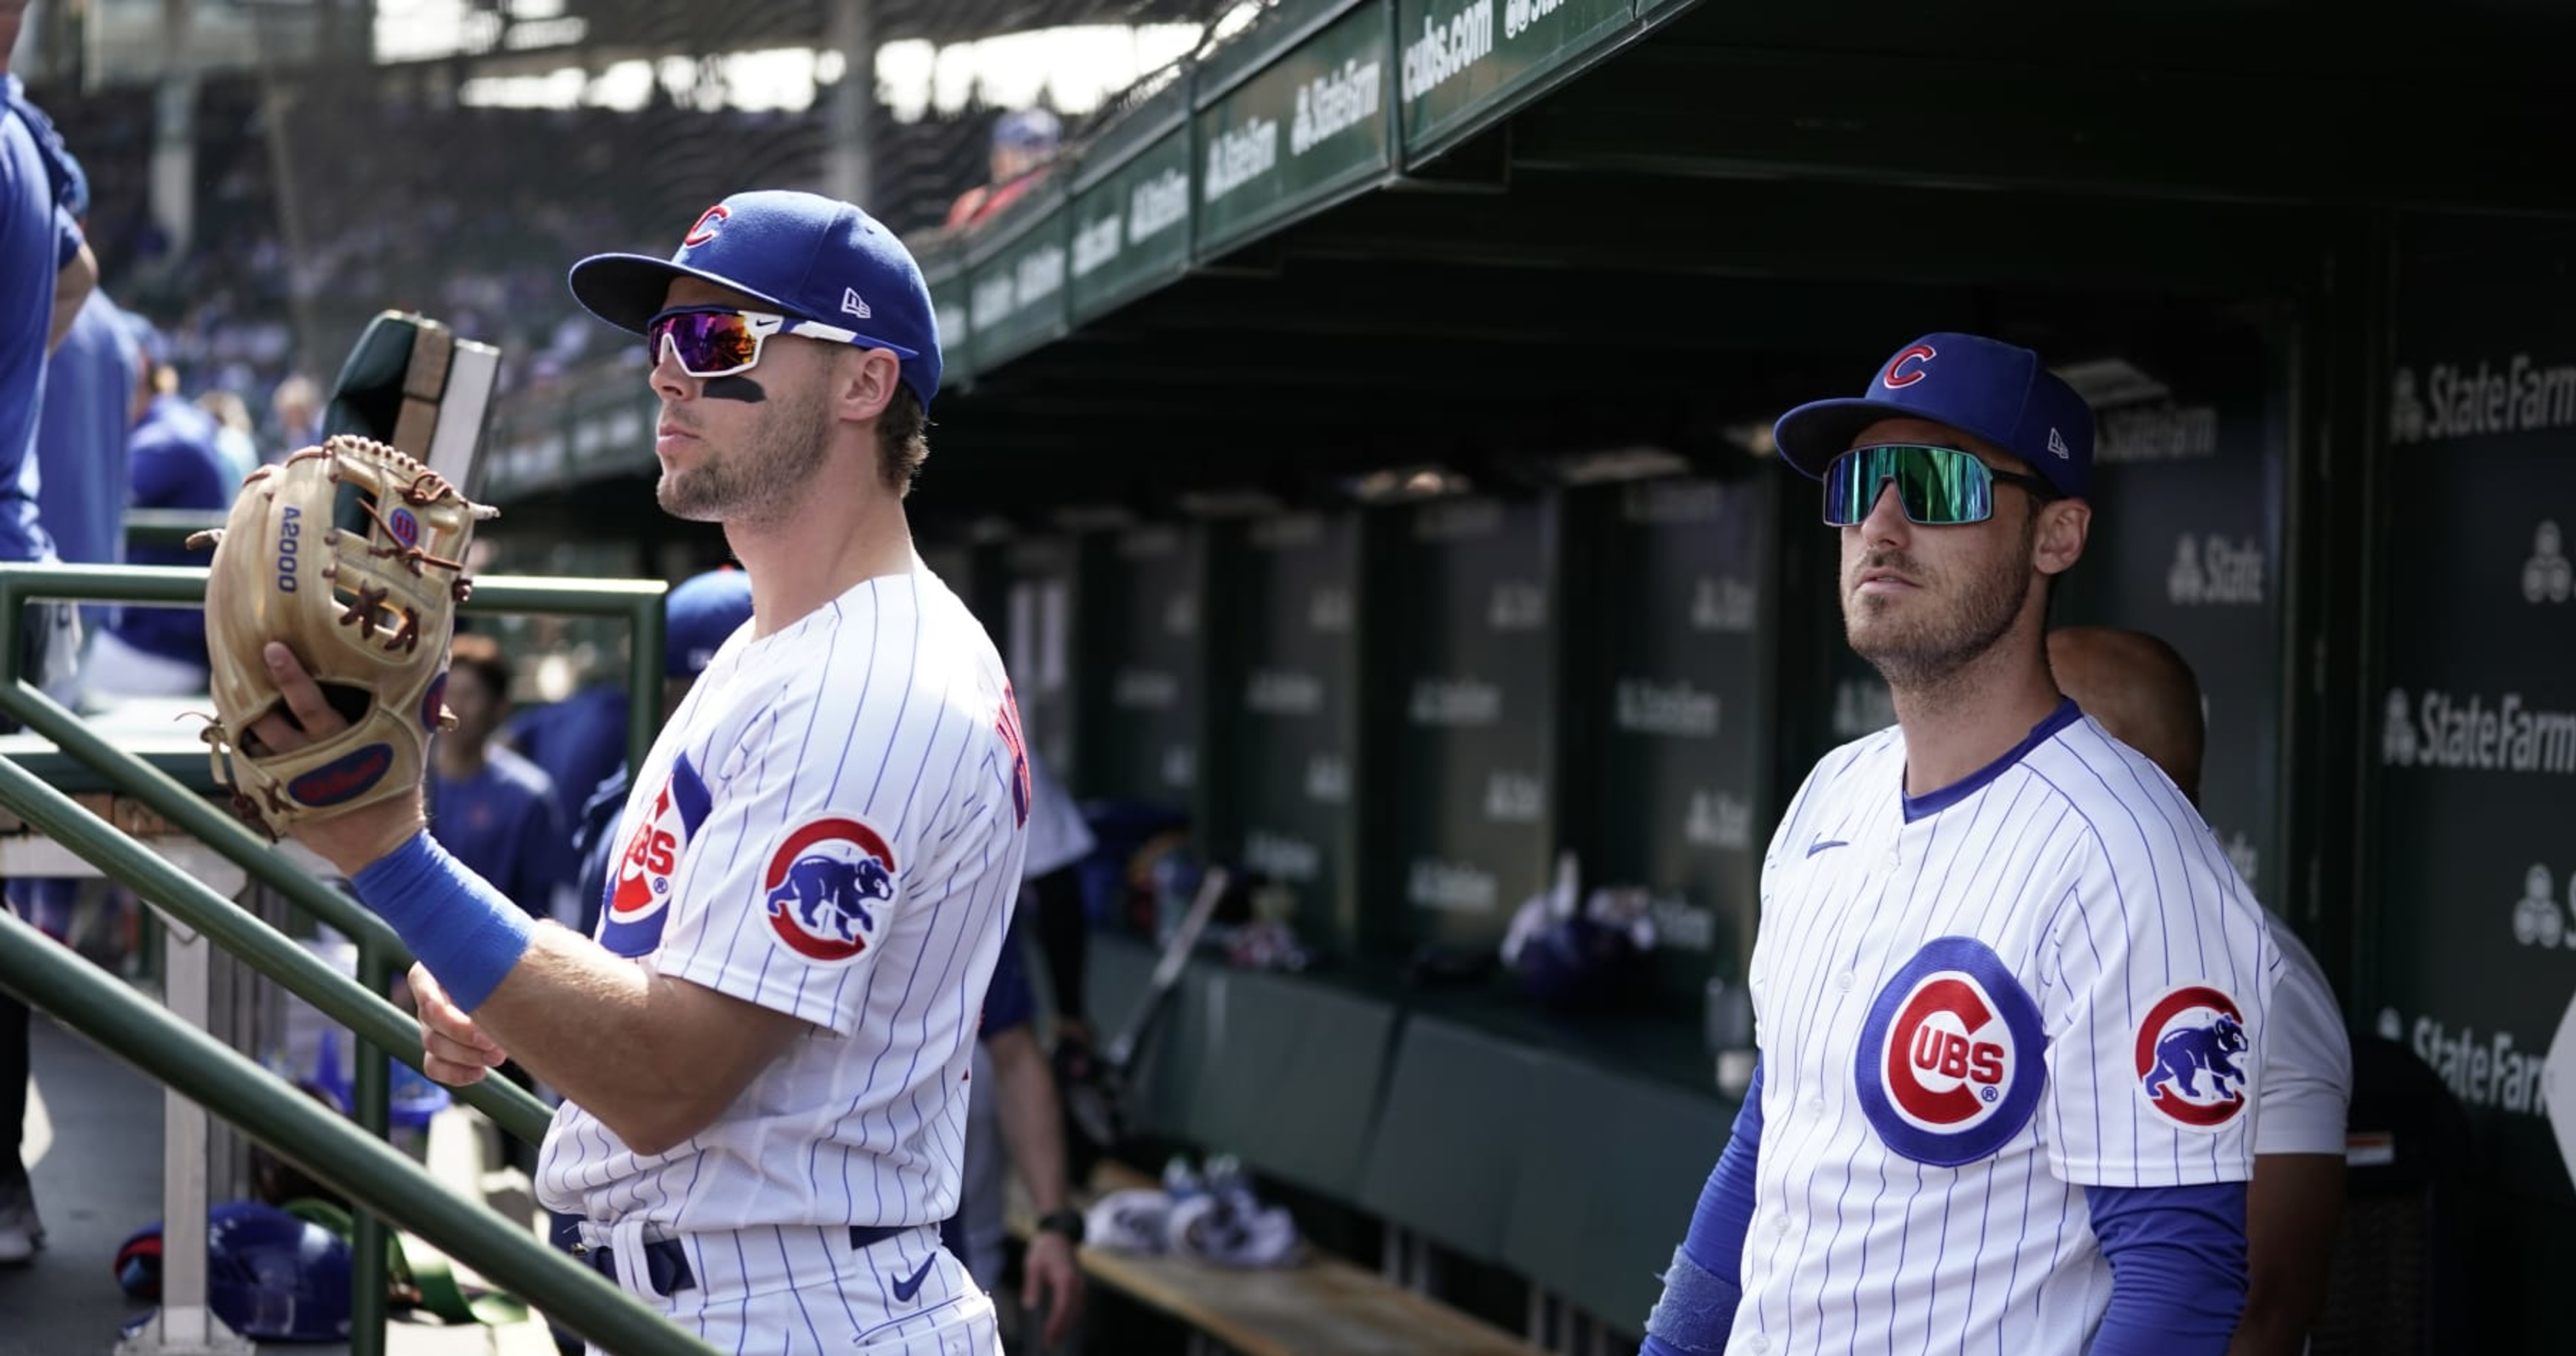 Season outlook for Cubs: Possibly good, definitely not great